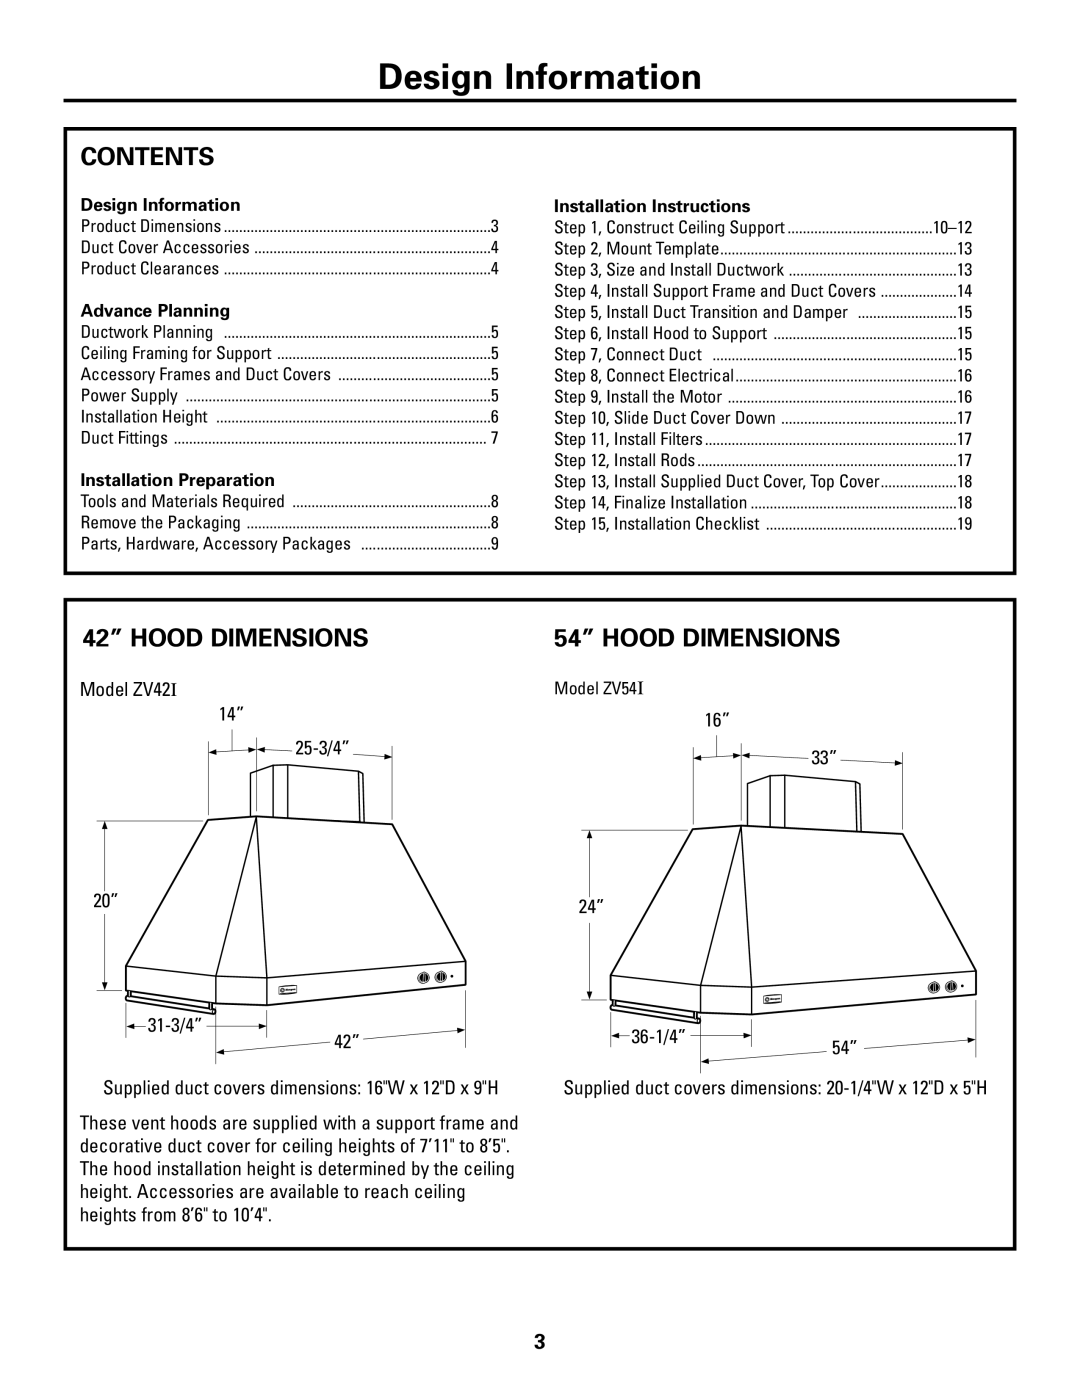 GE ZV421, ZV541 installation instructions Design Information, Contents, 42” HOOD DIMENSIONS, 54” HOOD DIMENSIONS 